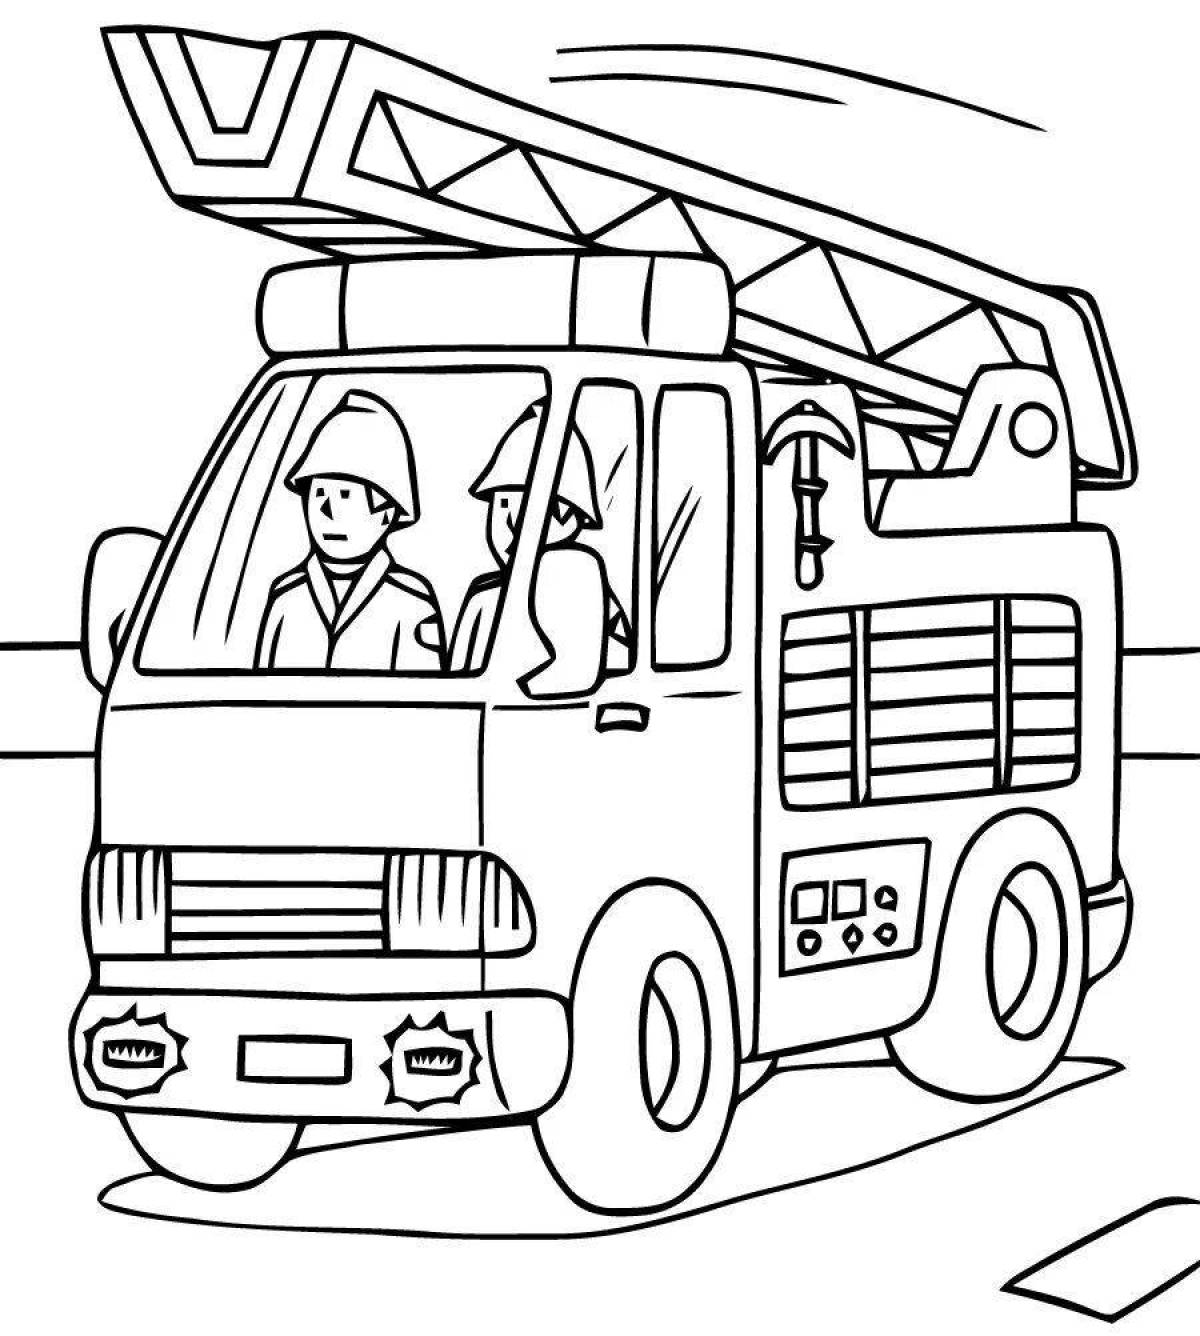 A fun coloring book of the transport profession for children 5-6 years old